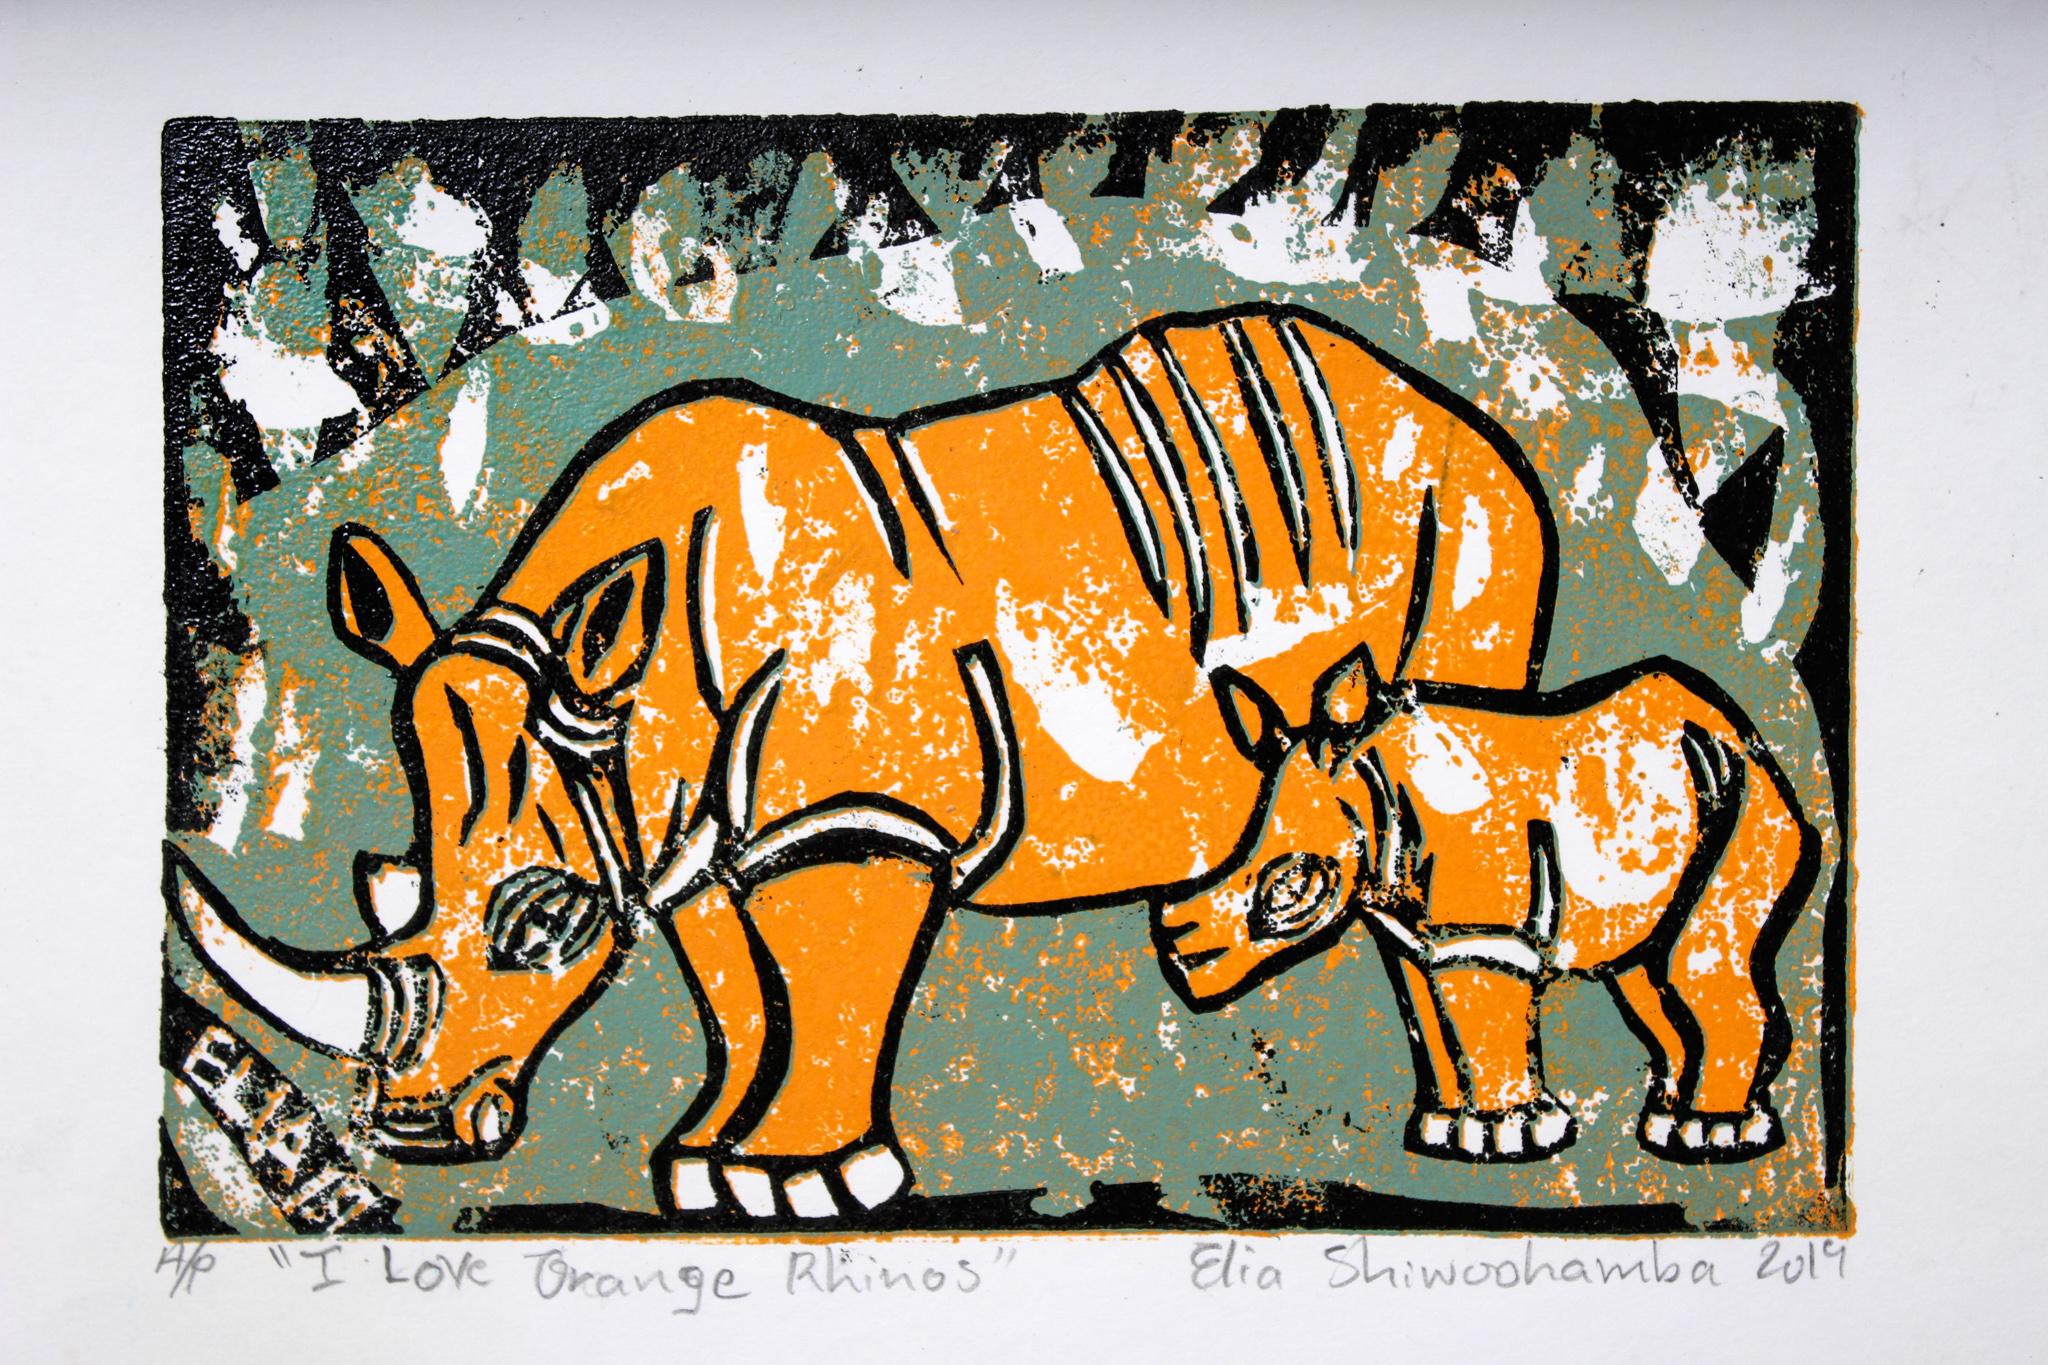 I love orange rhino, 2019. Cardboard print on paper. Unlimited Edition

Elia Shiwoohamba was born in 1981 in Windhoek, Namibia. He graduated from the John Muafangejo Art Centre in Windhoek in 2006. Specialising in printmaking and sculpture,